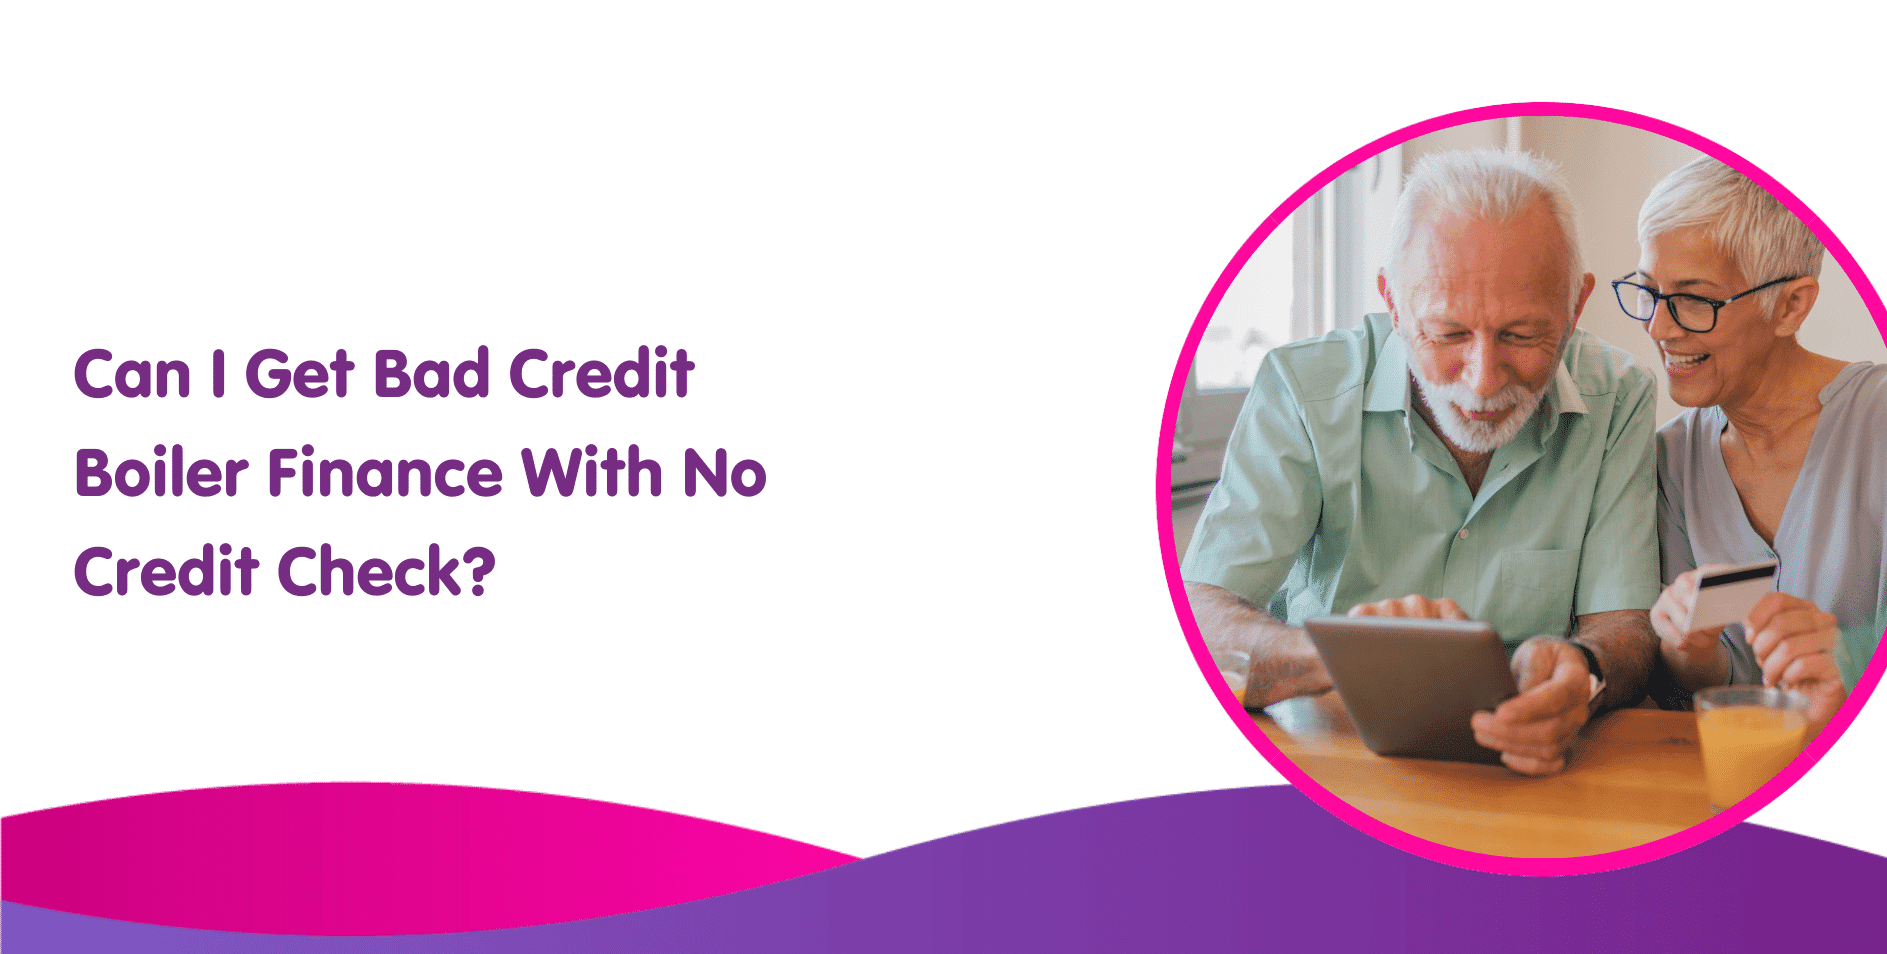 Can I Get Bad Credit Boiler Finance With No Credit Check